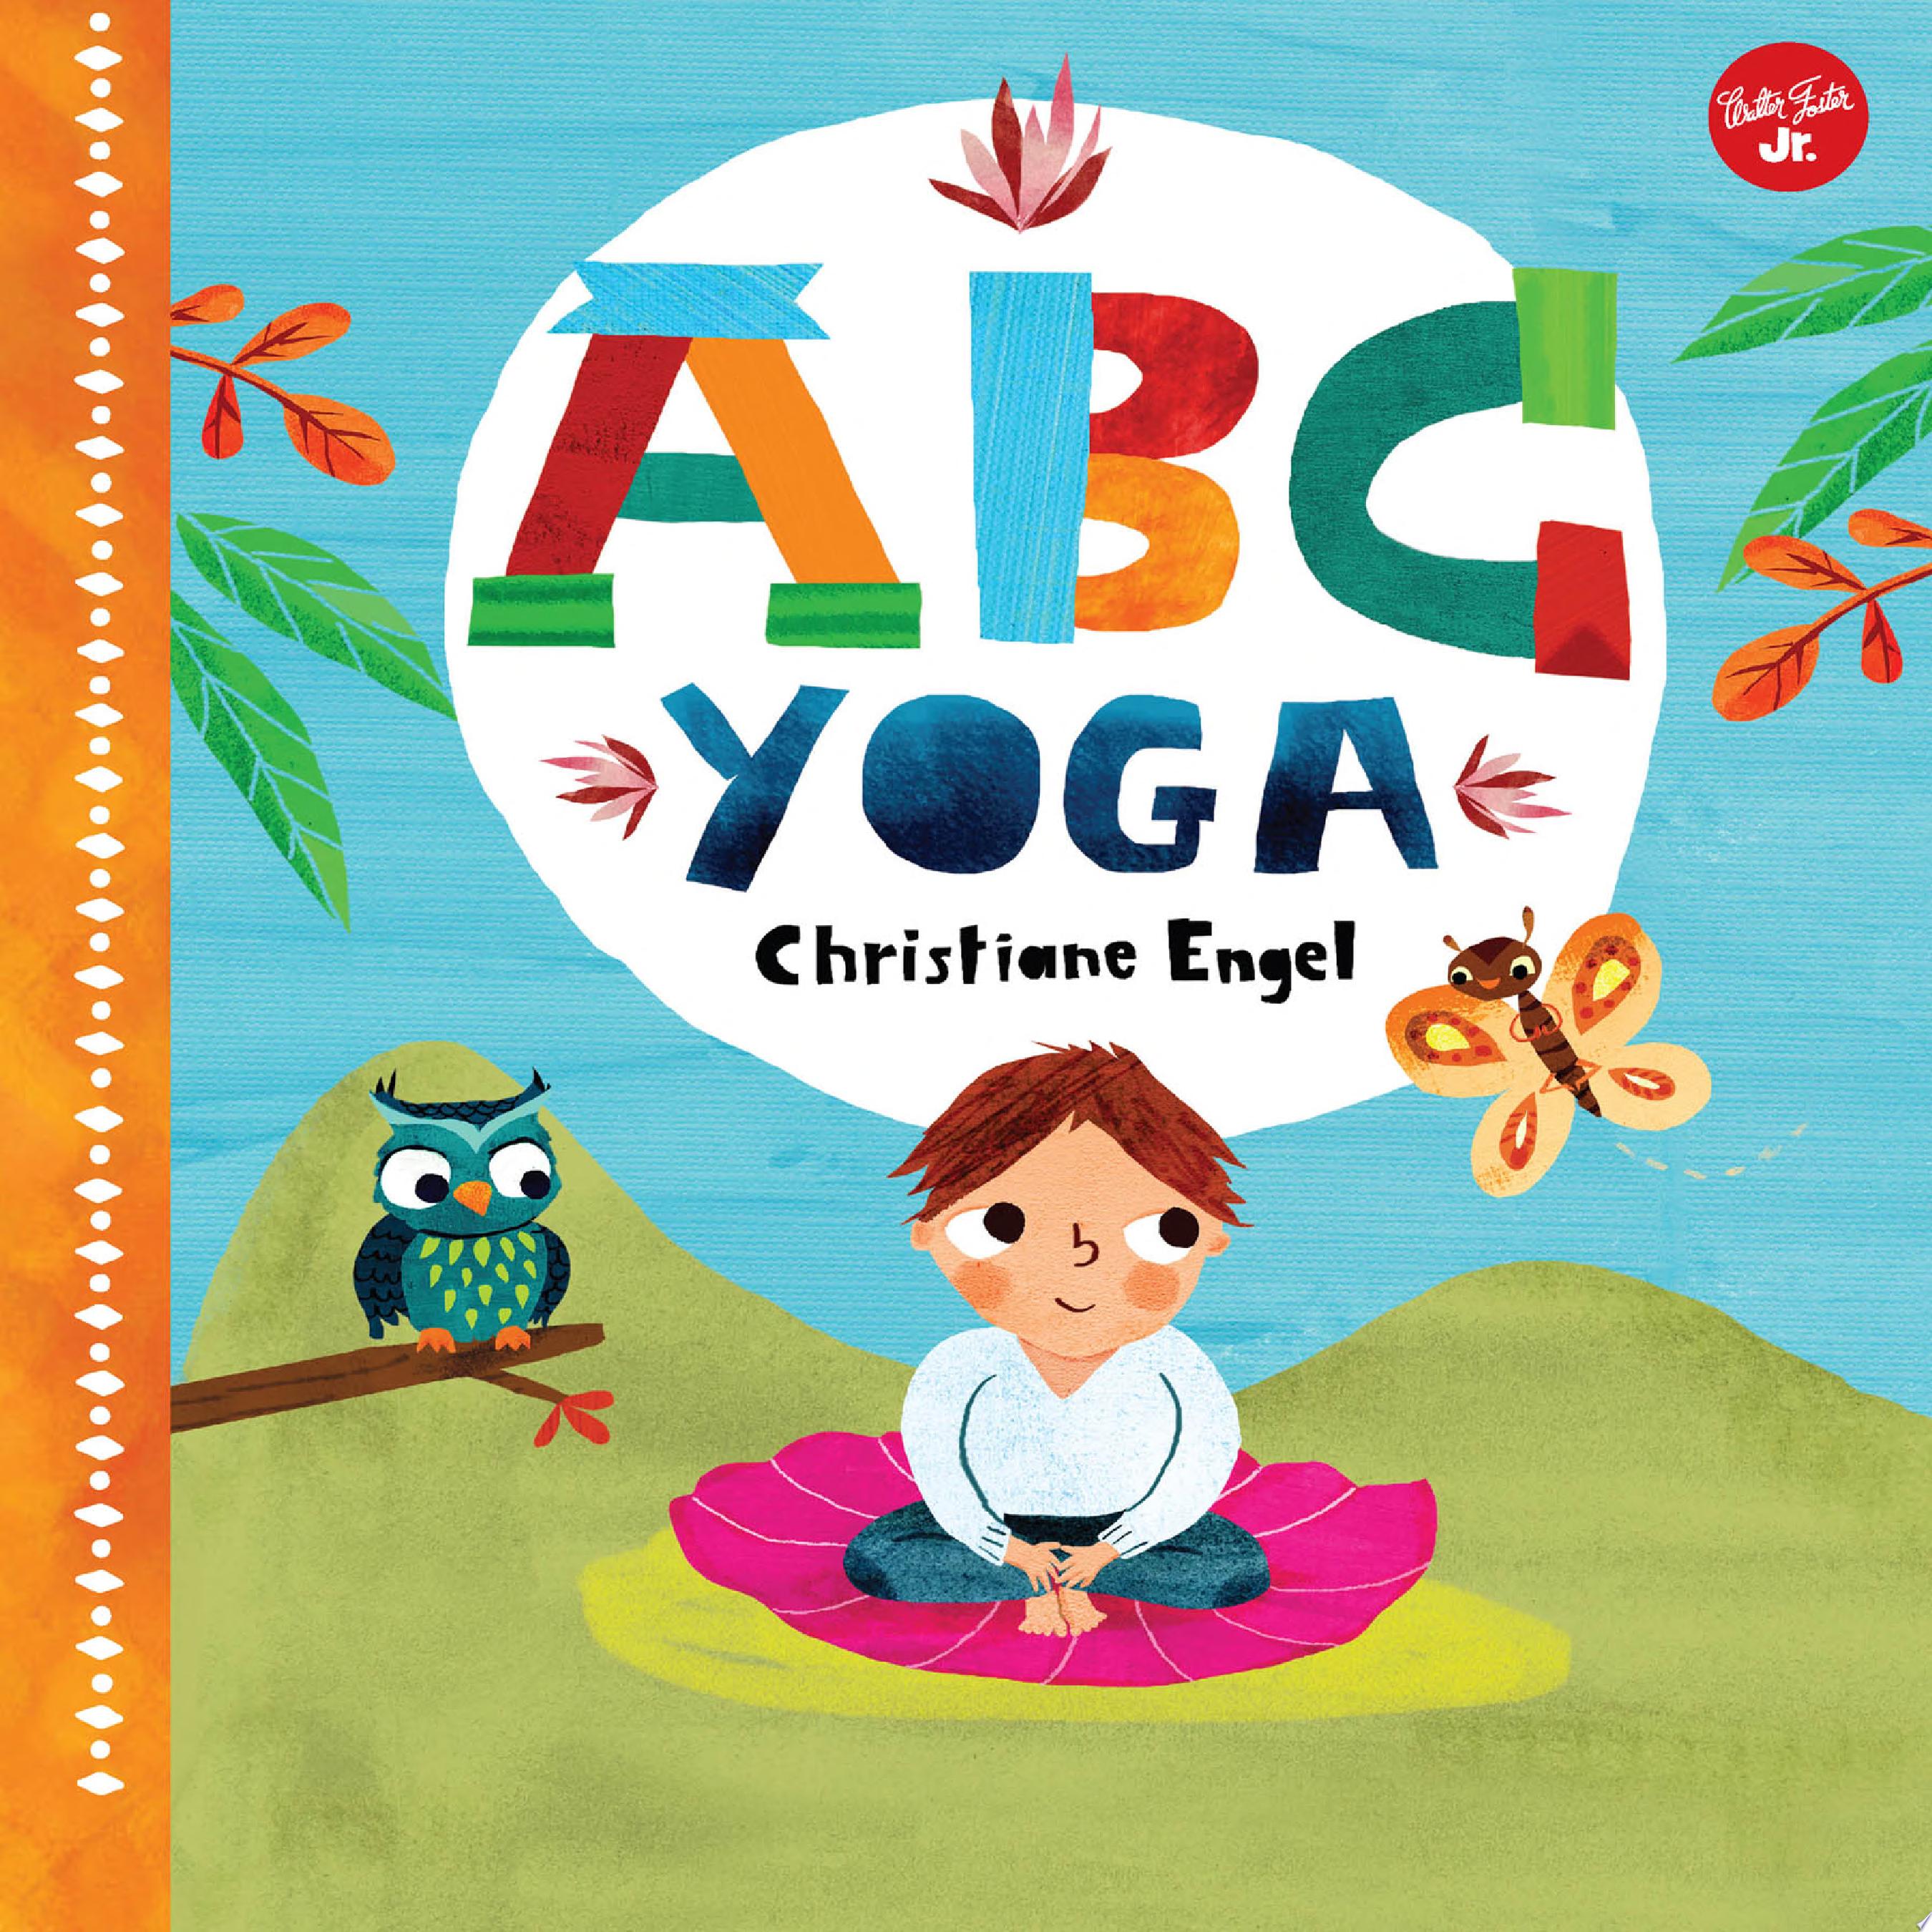 Image for "ABC for Me: ABC Yoga"